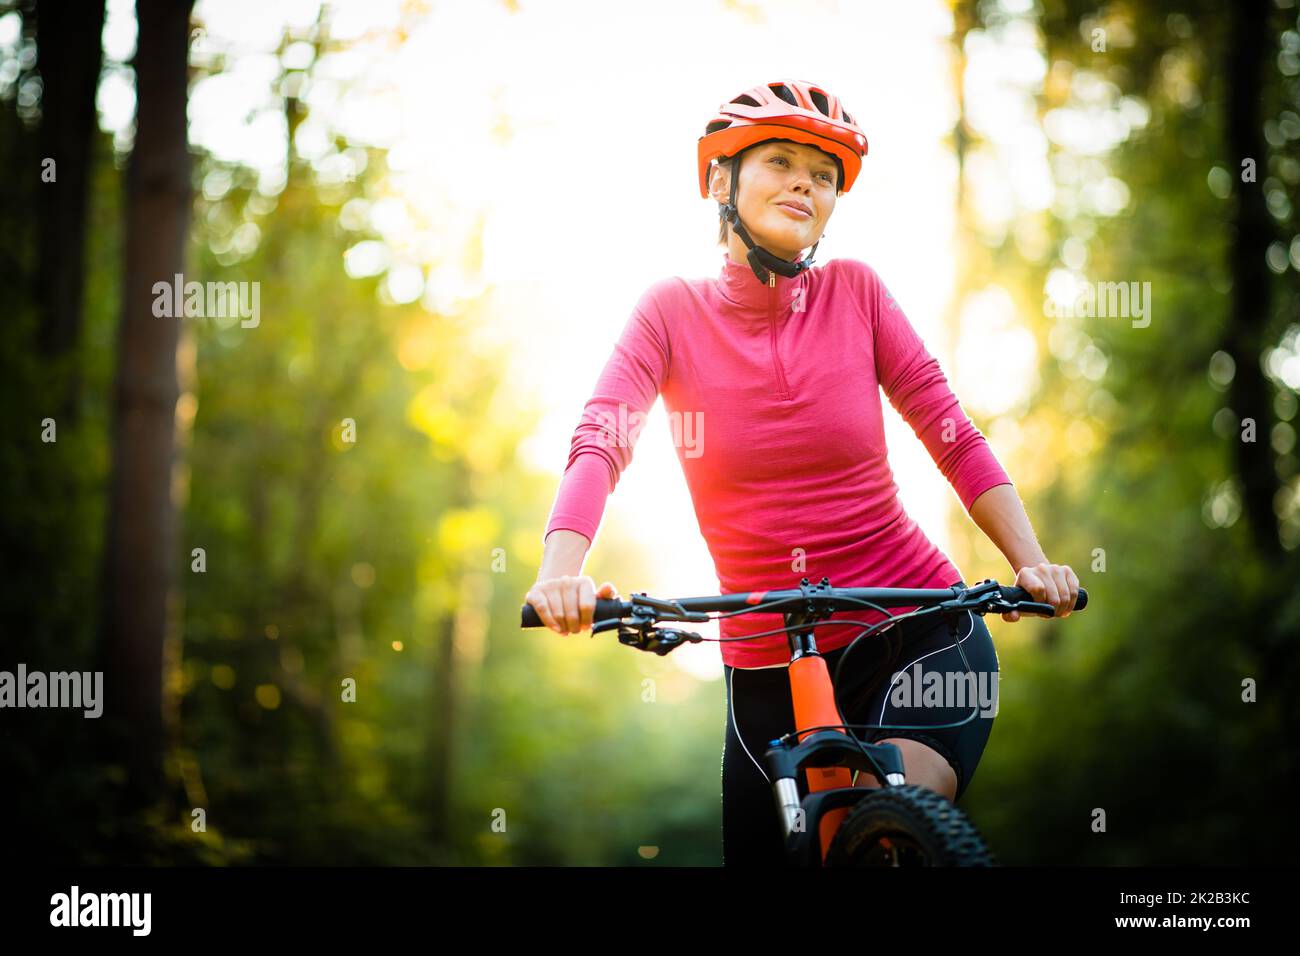 Pretty, young woman biking on a mountain bike enjoying healthy active lifestyle outdoors in summer (shallow DOF) Stock Photo